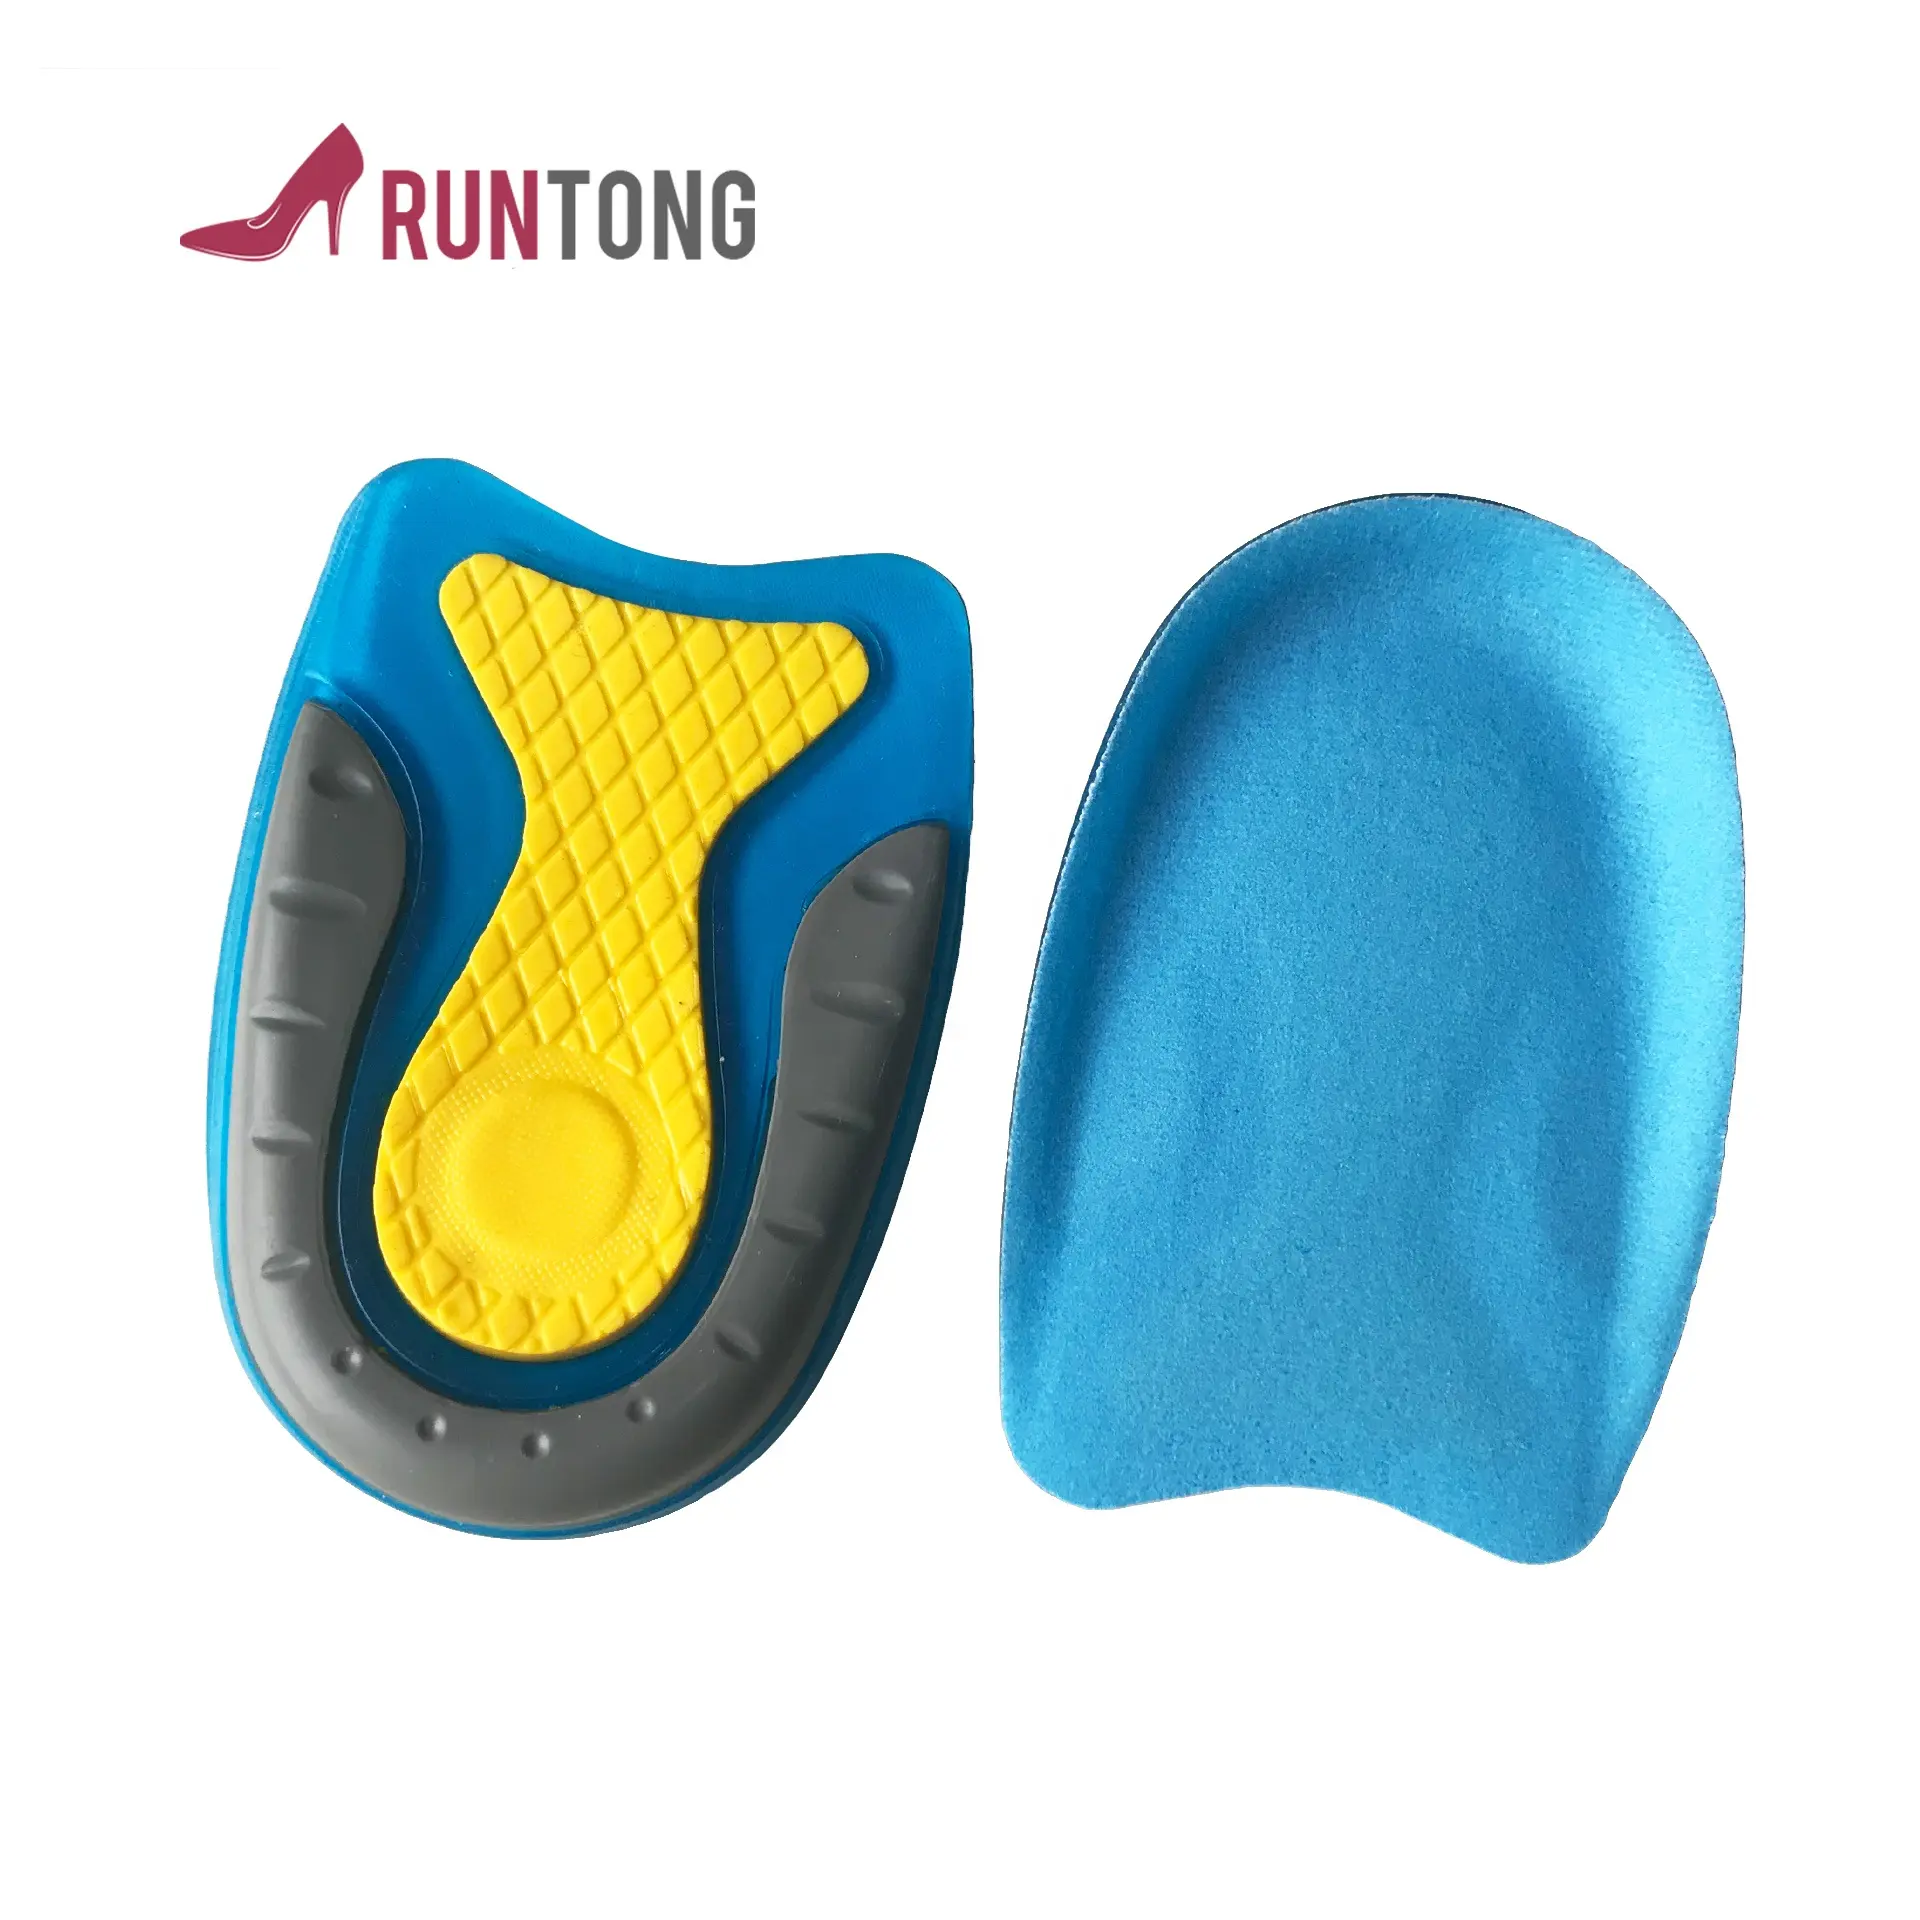 100% pure silicone height increase heel cushion cooling insoles